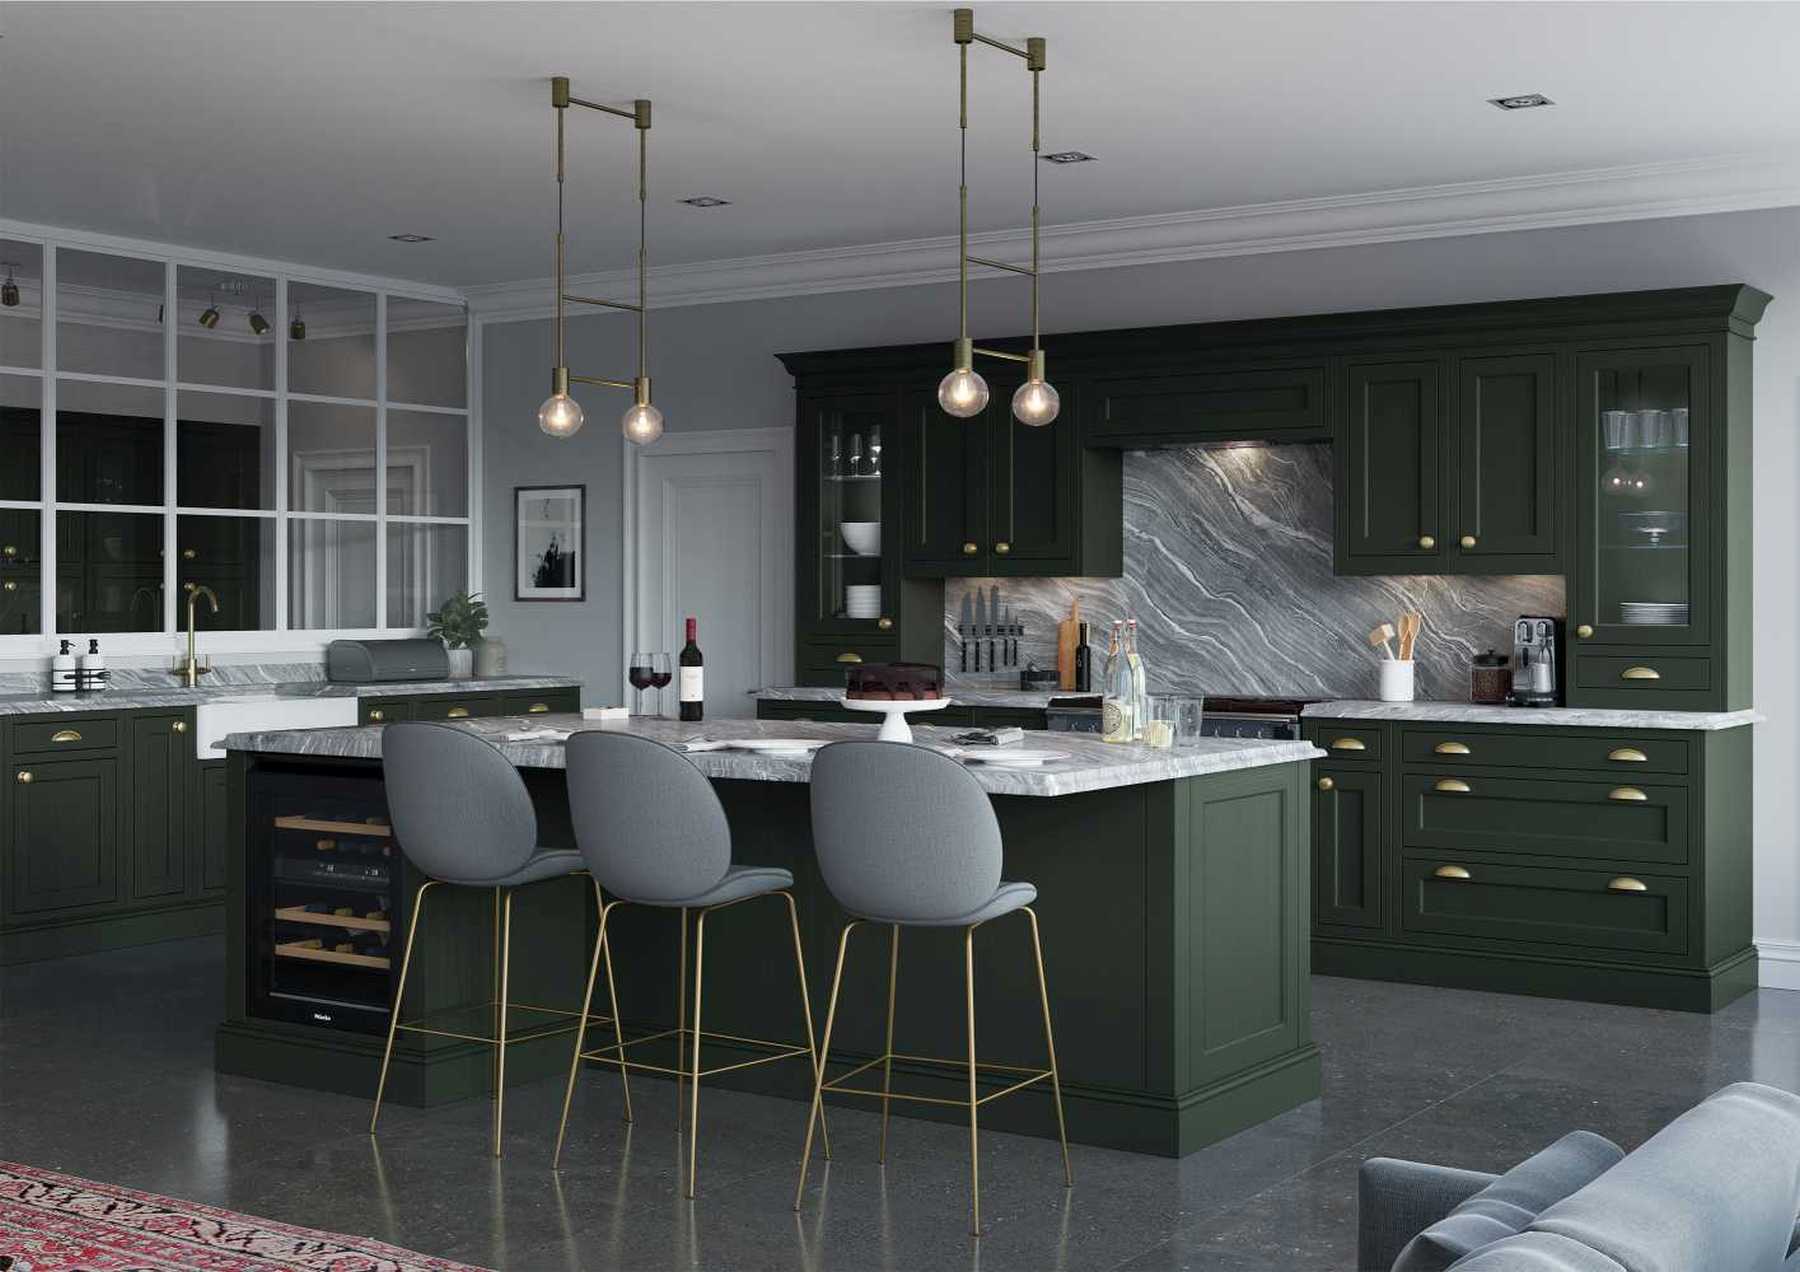 Luxurious inframe kitchen in forst green island pic 2